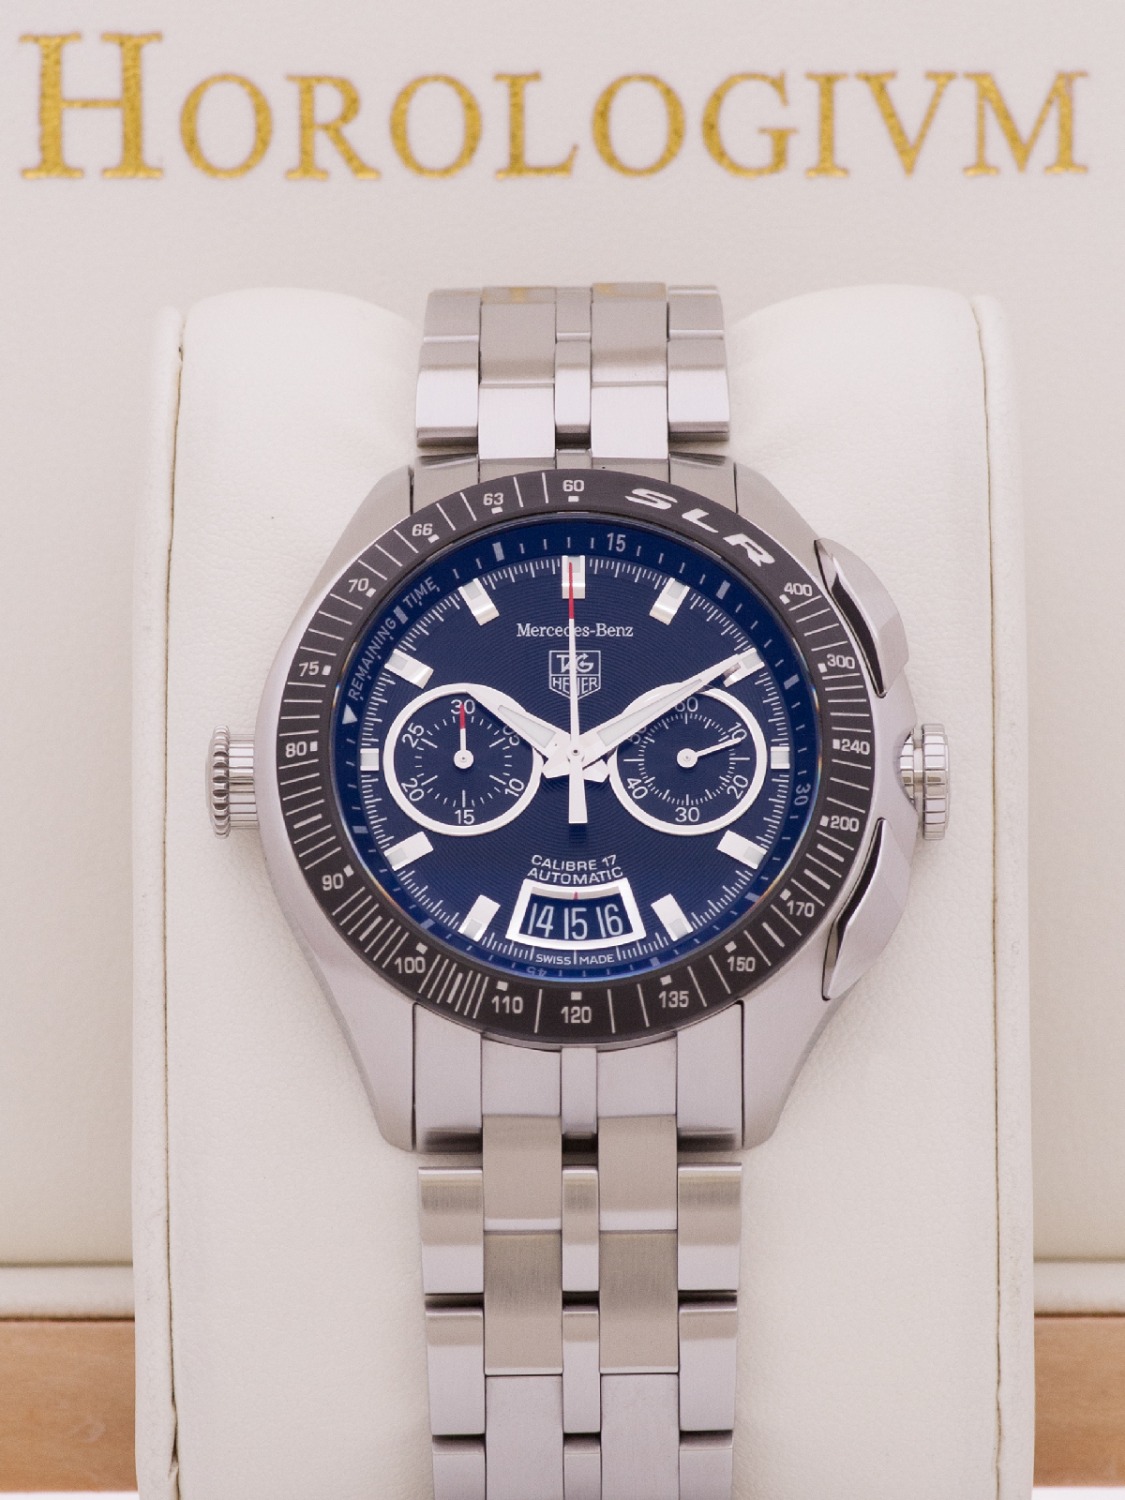 Tag Heuer Mercedes-Benz SLR Limited 3500 pcs. watch, silver